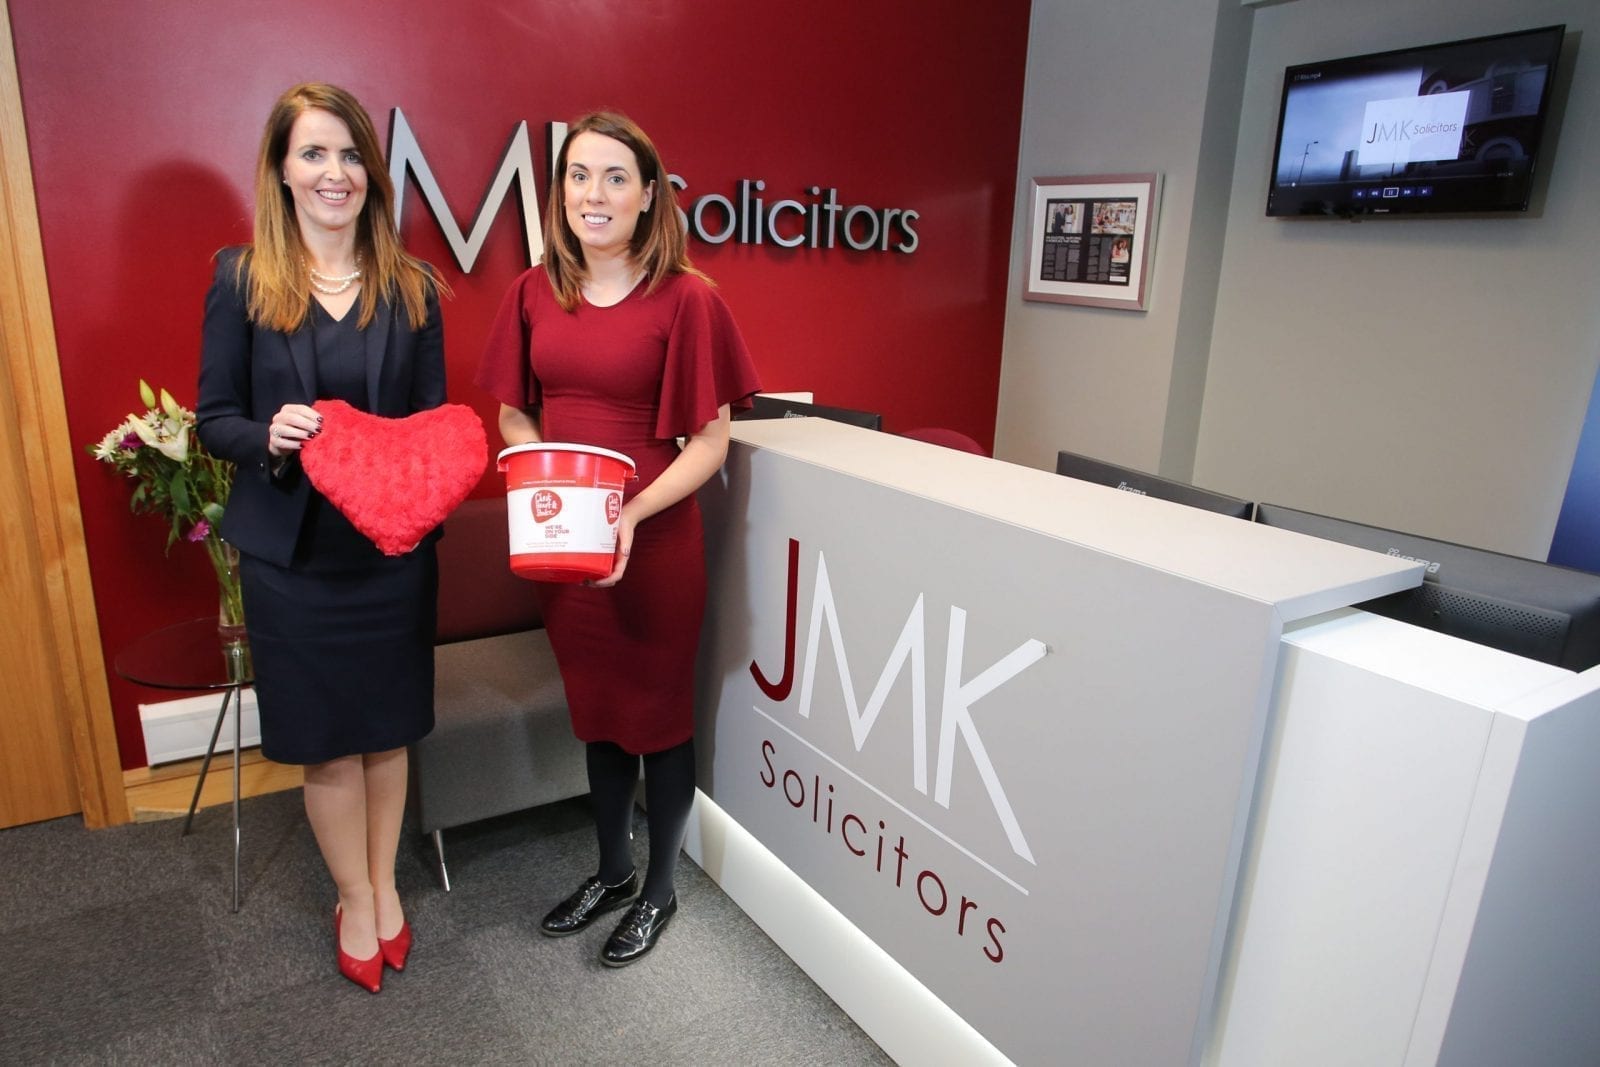 JMK choose Northern Ireland Chest Heart and Stoke as 2019 Charity Partner